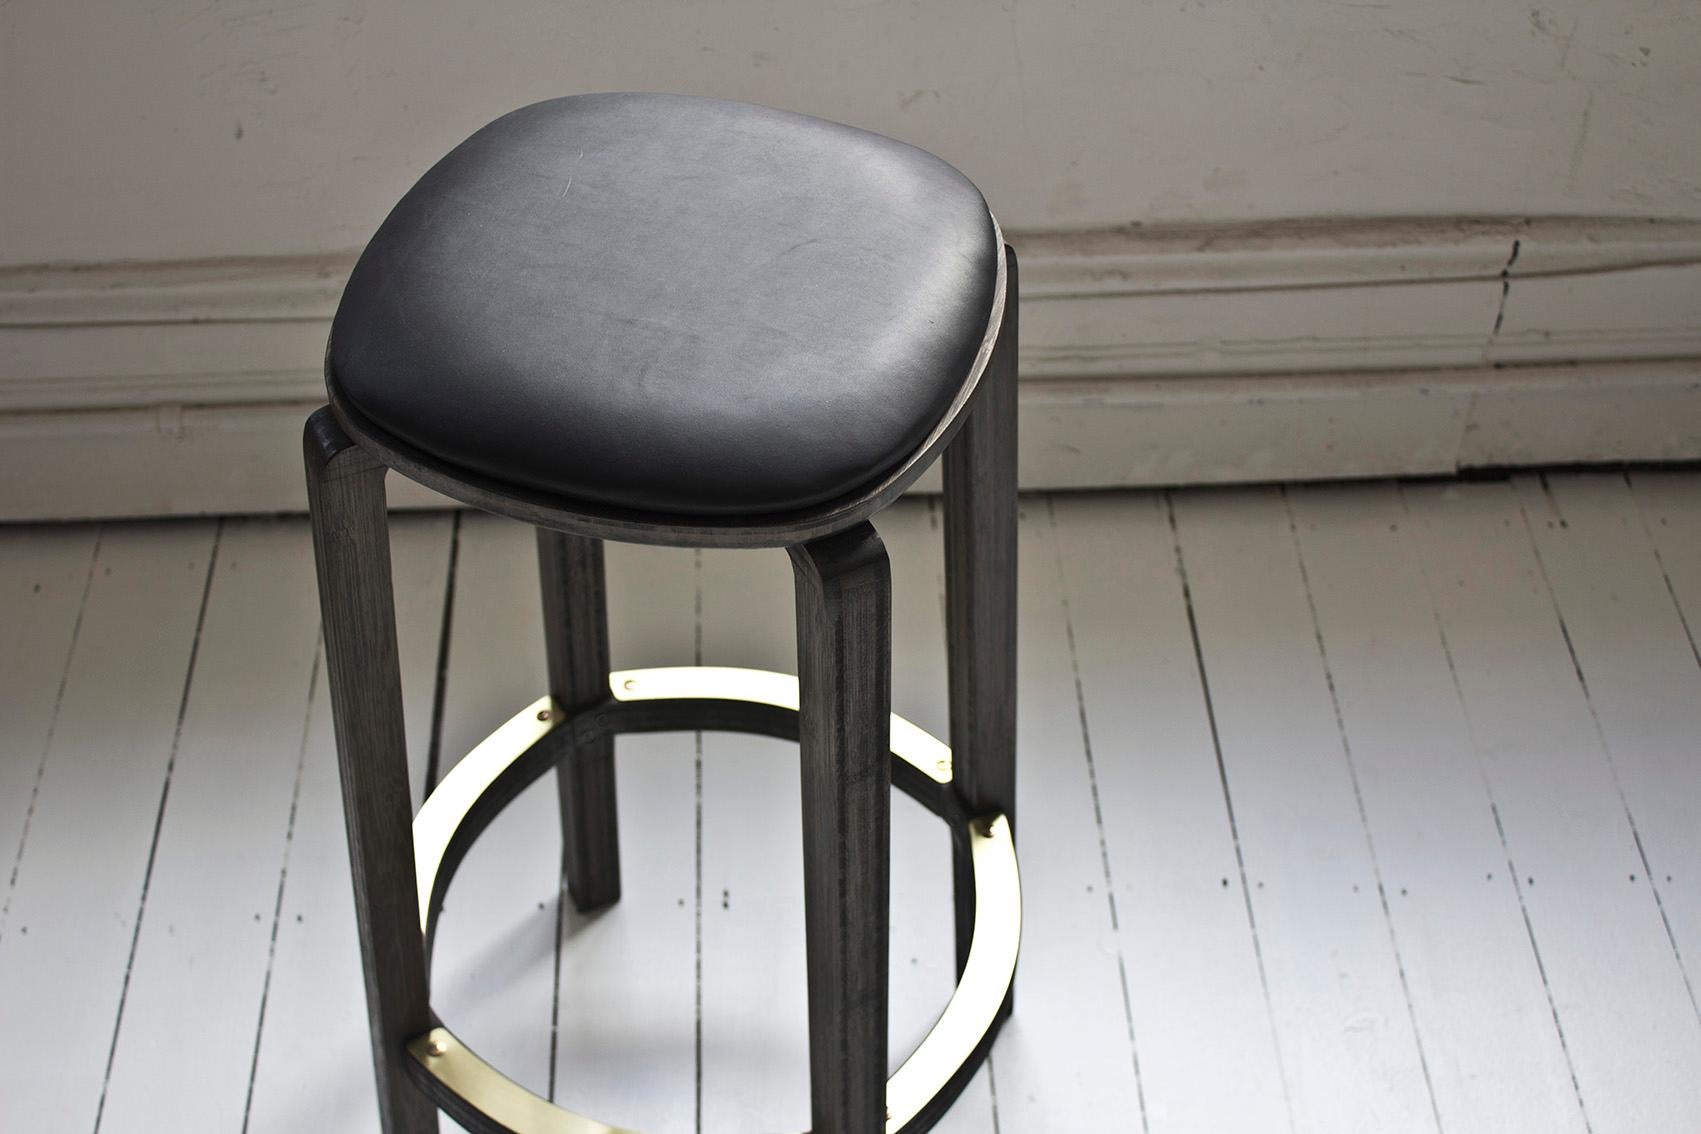 Boo stools are sturdy and versatile, made from 100% solid bamboo. Available in a Japan black stain finish with a polished brass foot guard and leather cushions. Boo stools can also be made in custom dimensions.